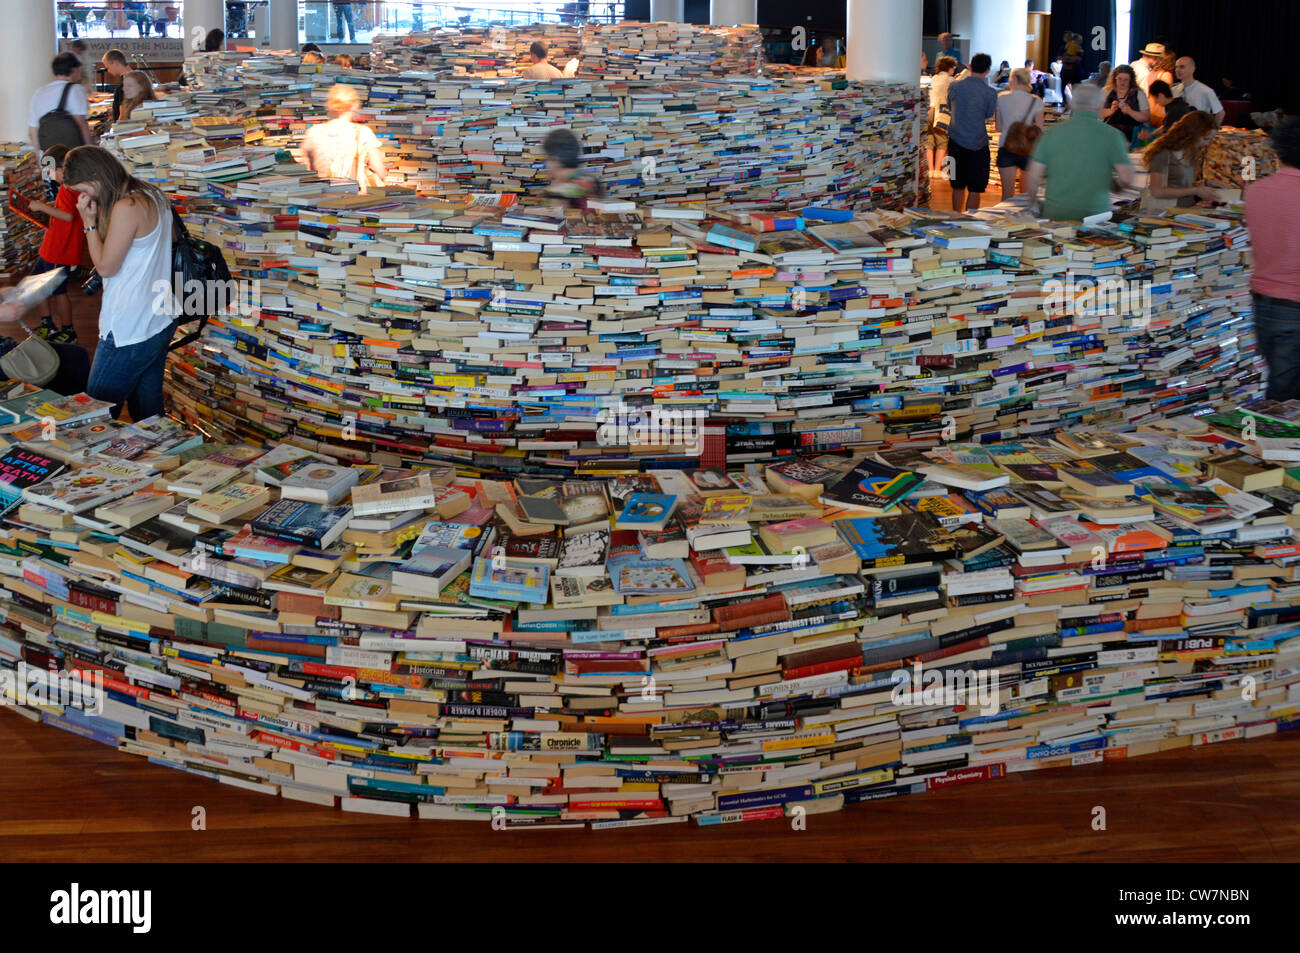 People wandering around indoor maze built with 250,000 books inspired by Jorge Luis Borges & created by Brazilian artists Marcos Saboys & Gualter Pupo Stock Photo